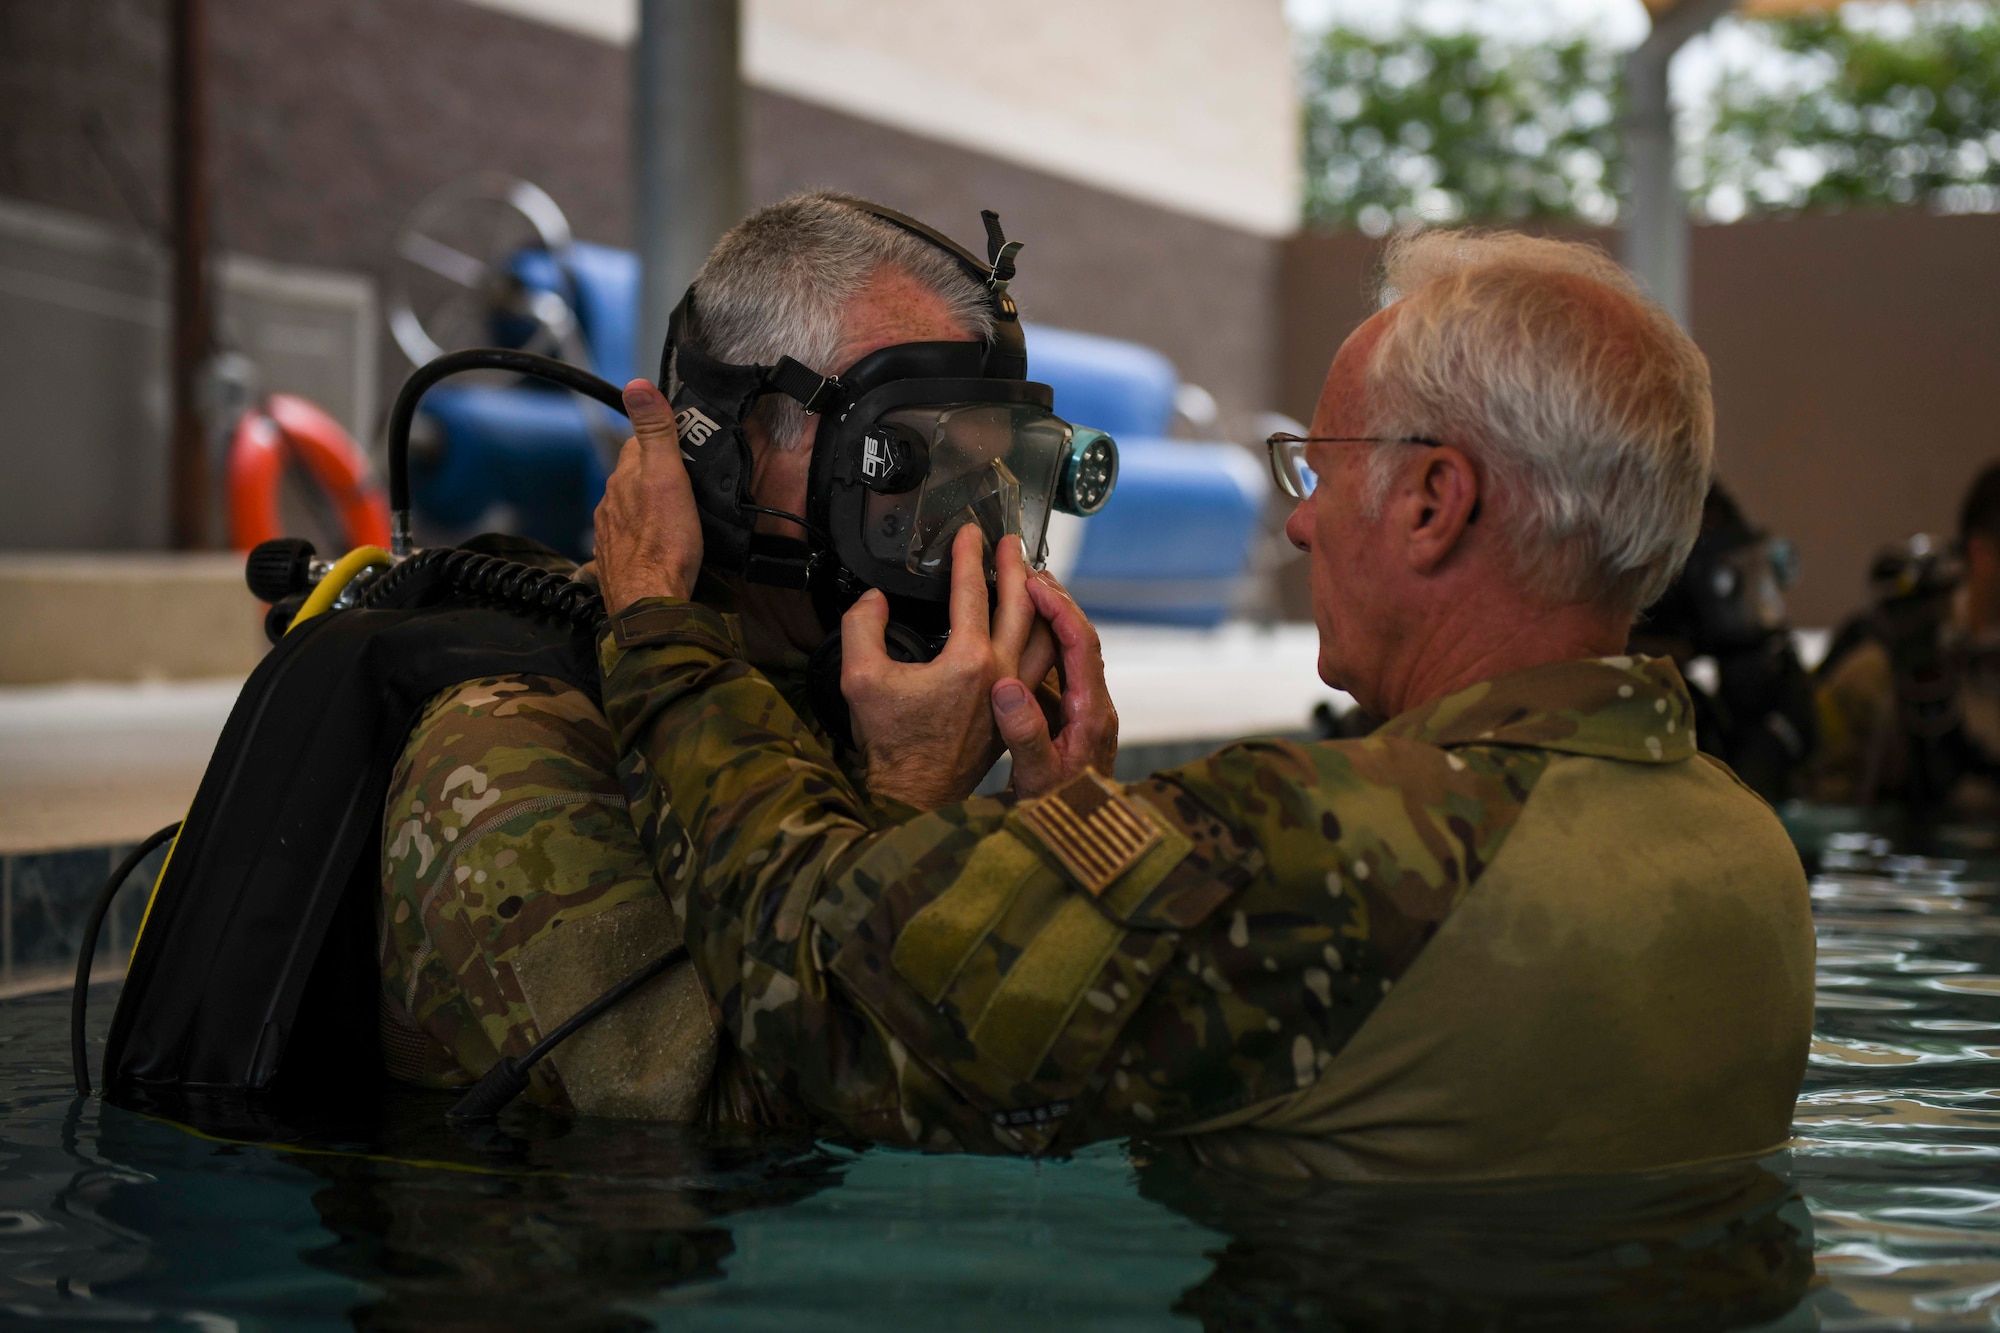 Two people performing equipment checks in a pool